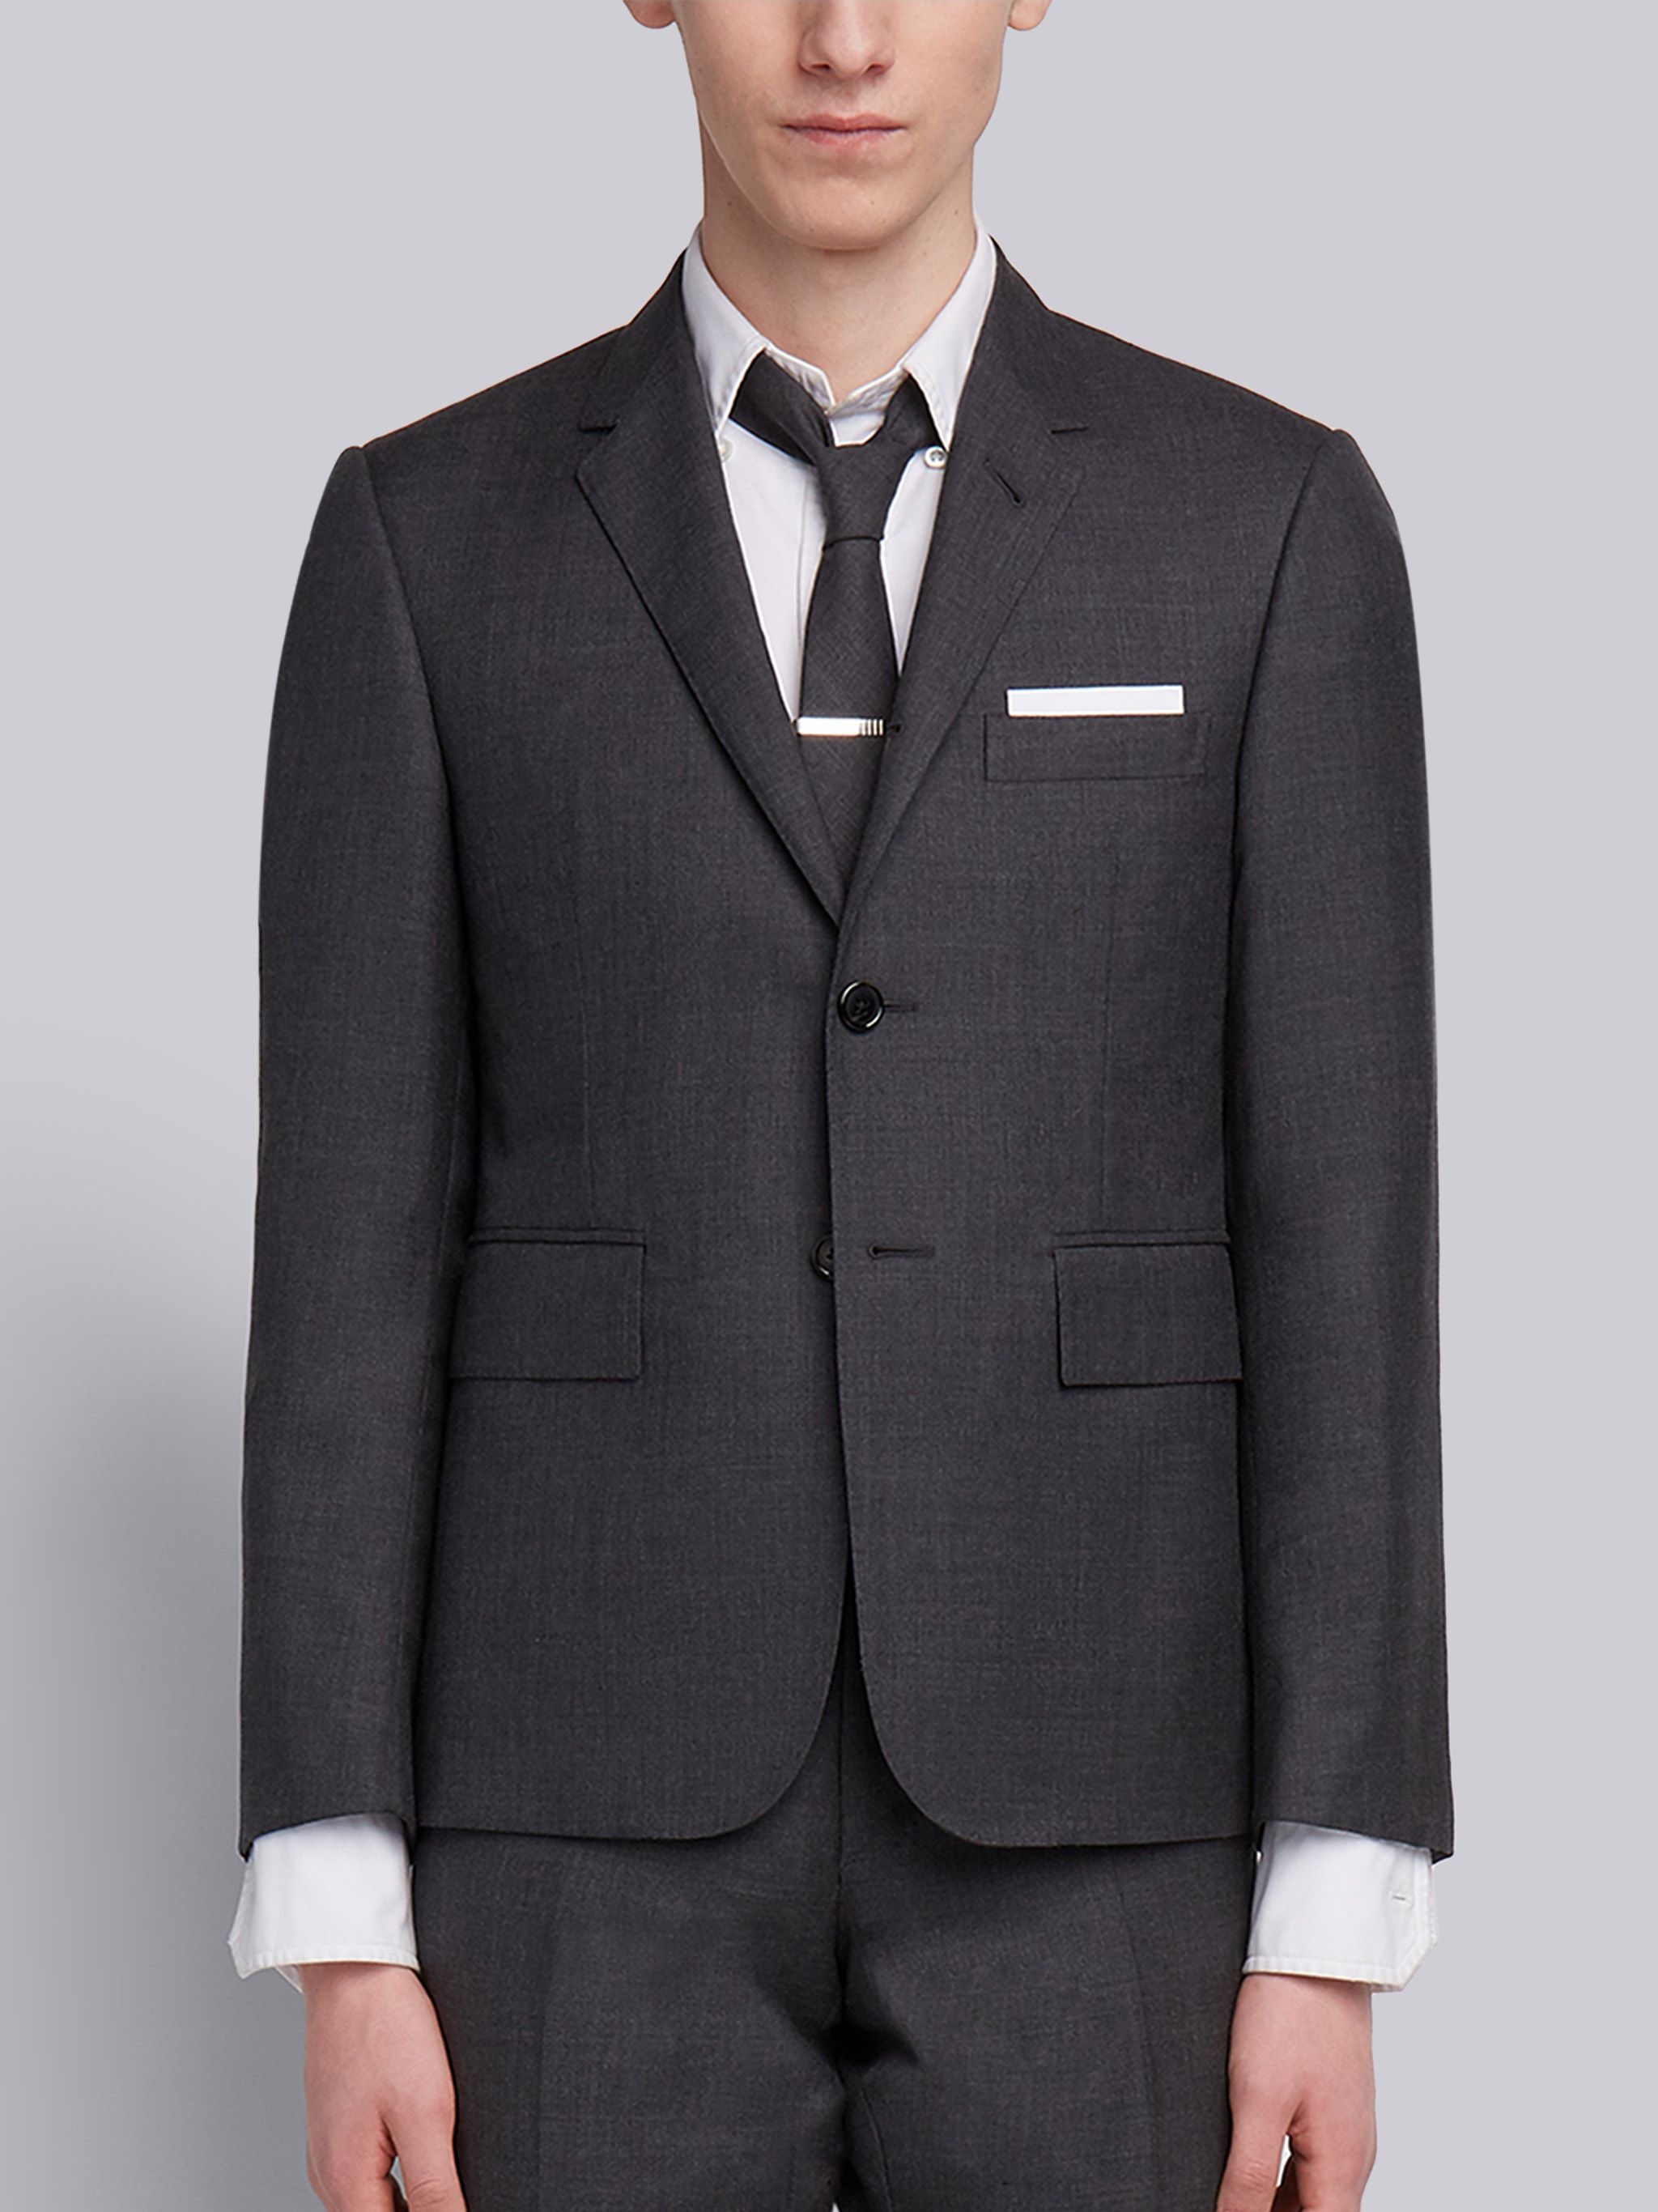 Dark Grey Super 120's Wool Twill Classic Suit and Tie - 3